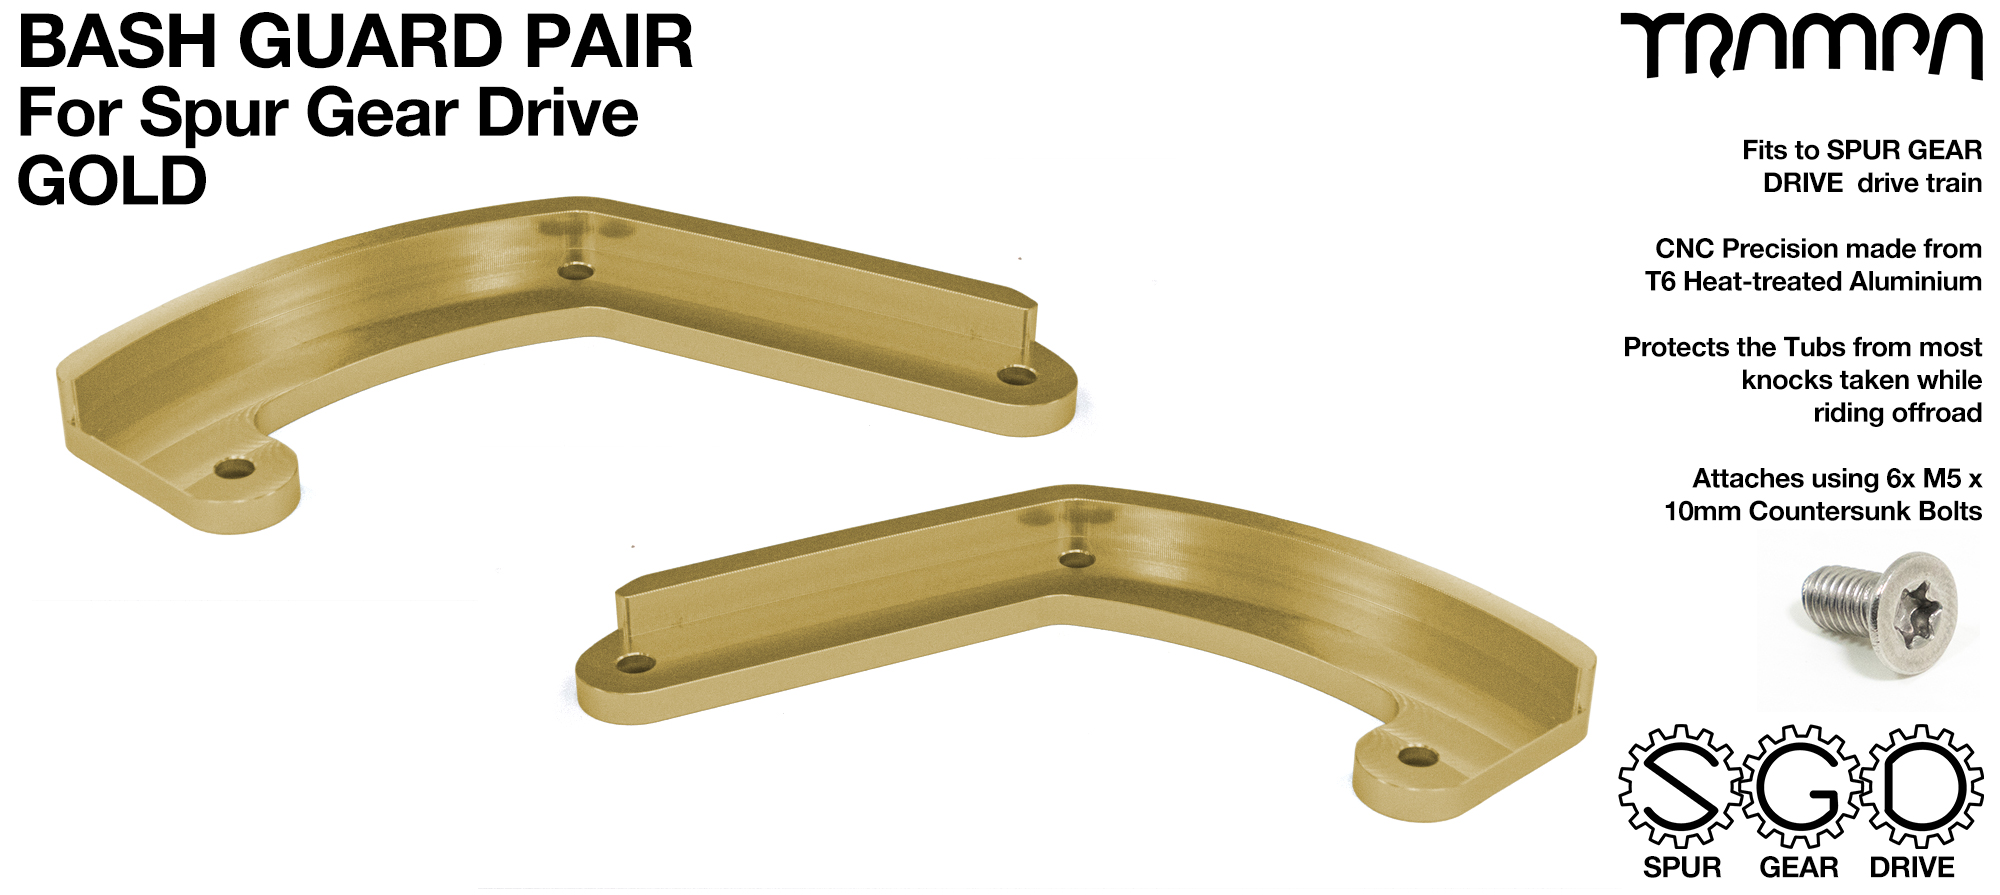 MkII Spur Gear Drive Bash Guards PAIR - GOLD